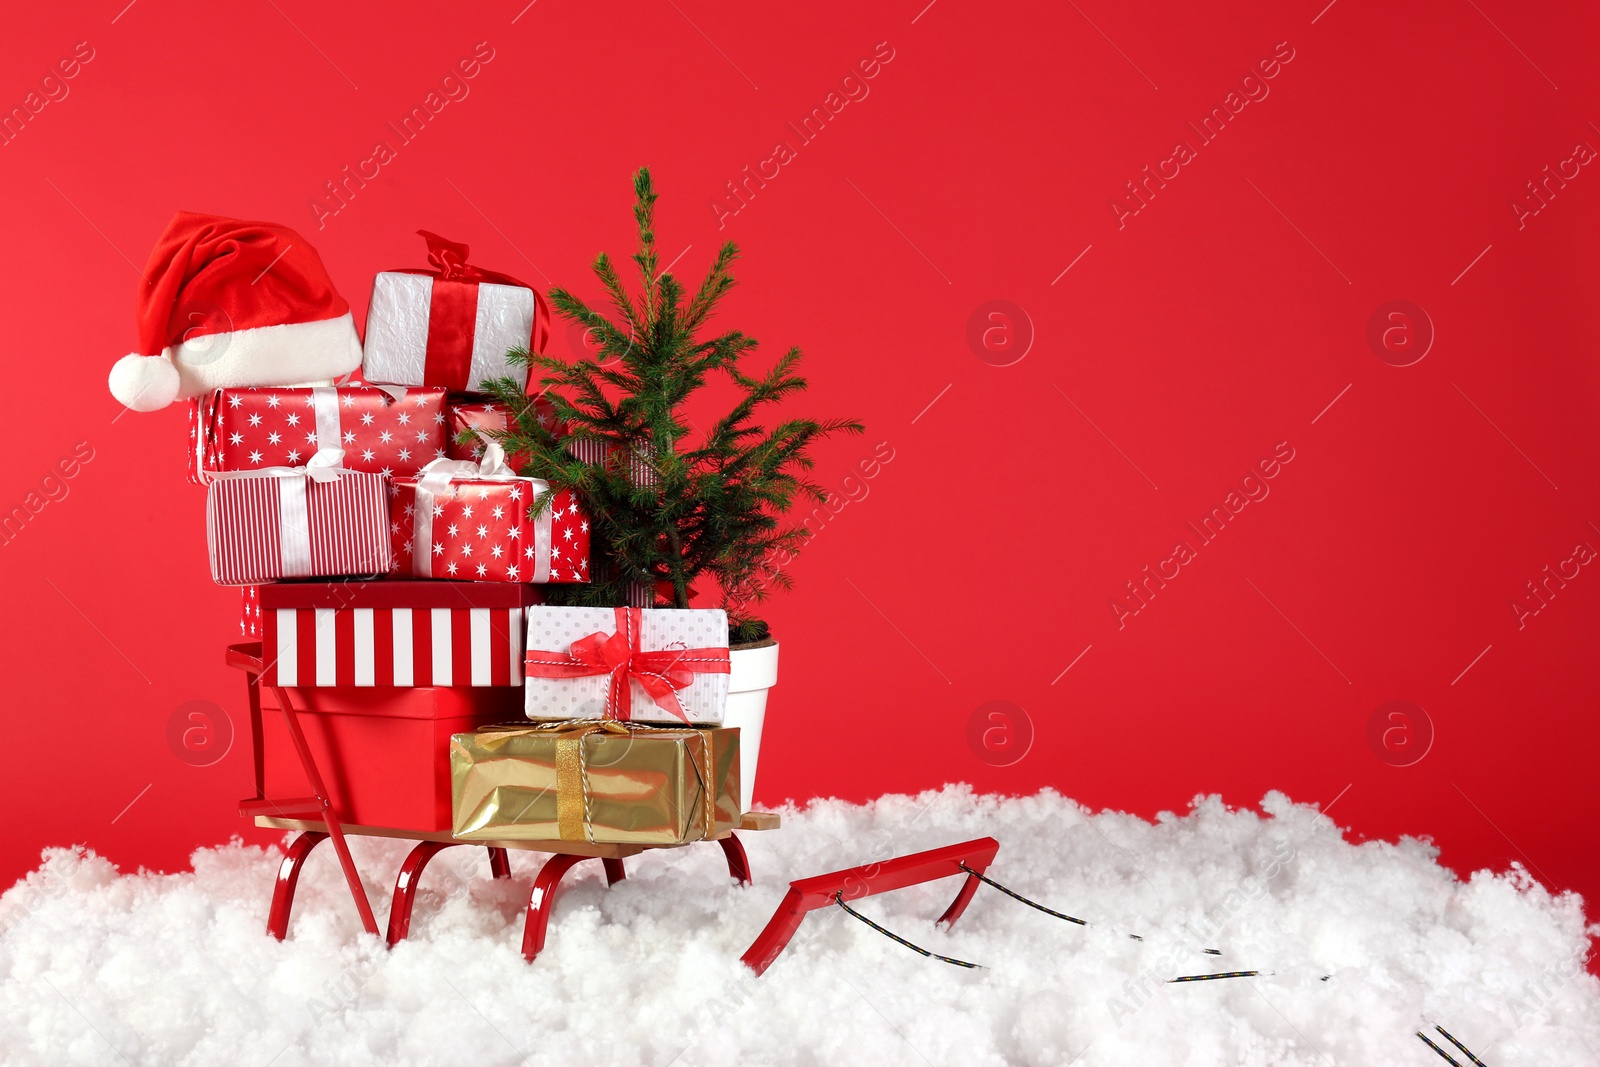 Photo of Sleigh with presents, Santa hat and fir tree in artificial snow on red background. Space for text